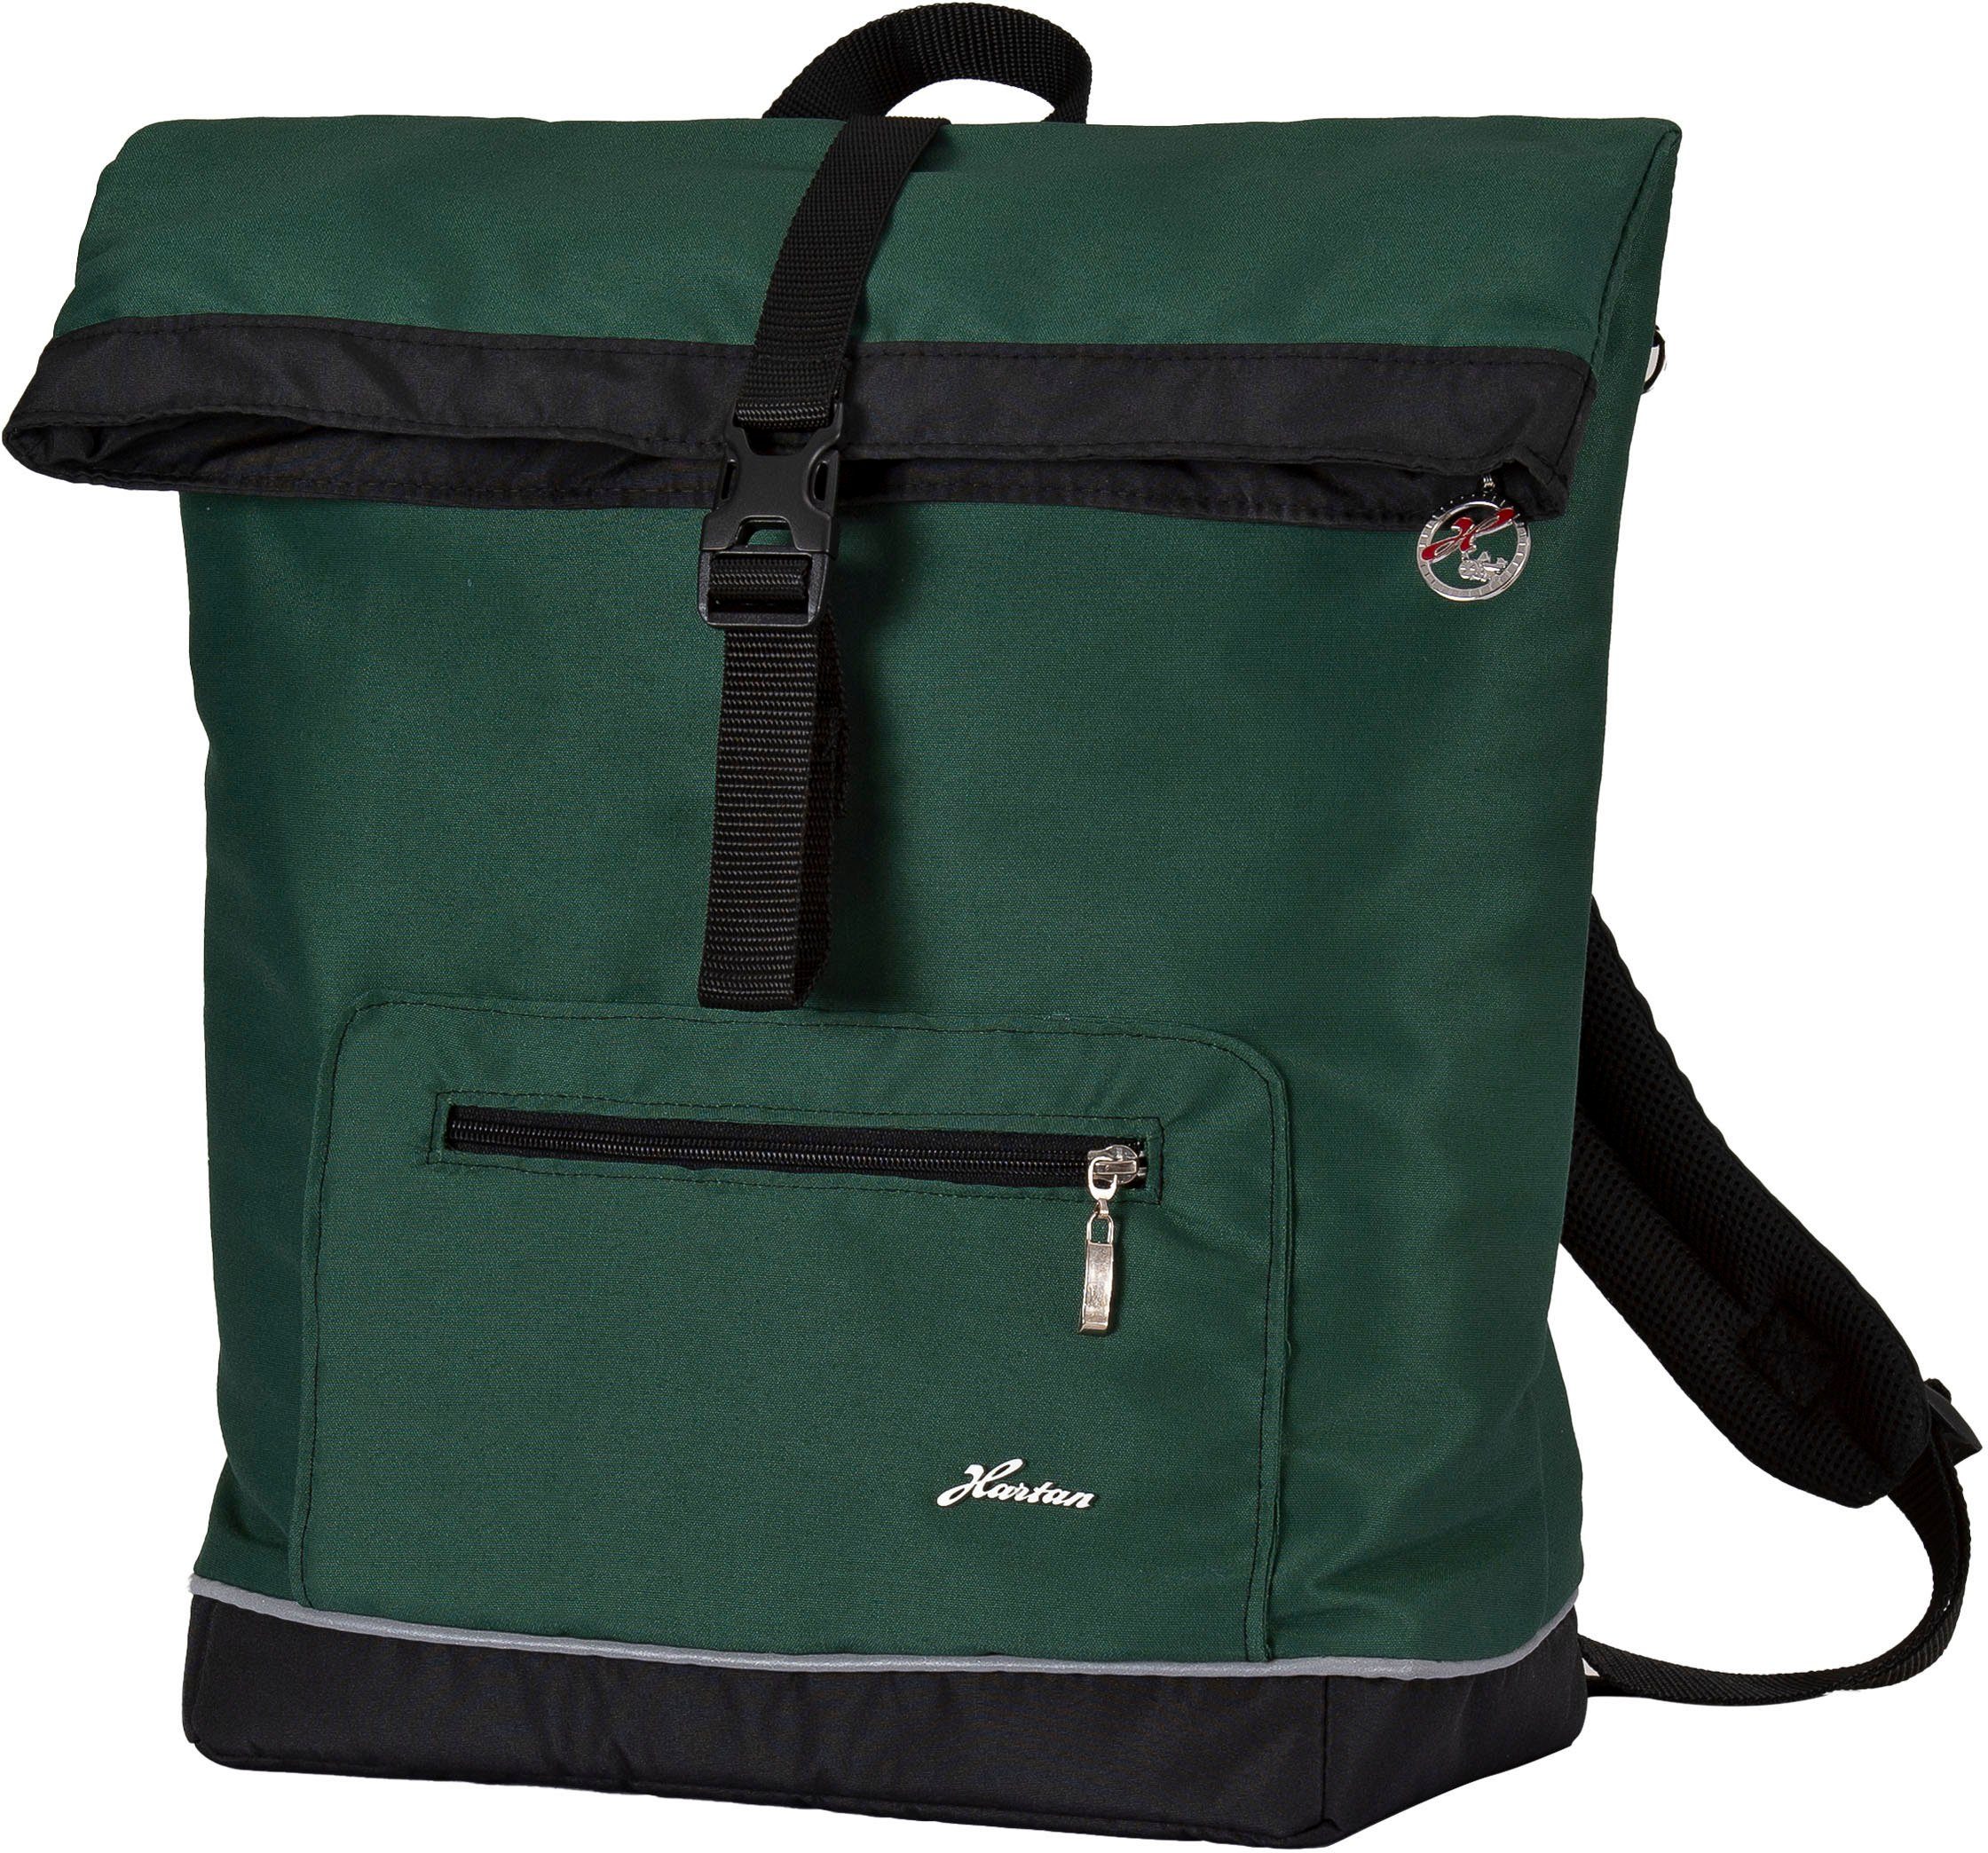 Hartan Wickelrucksack Space bag - Casual Collection, mit Thermofach; Made in Germany pandy family